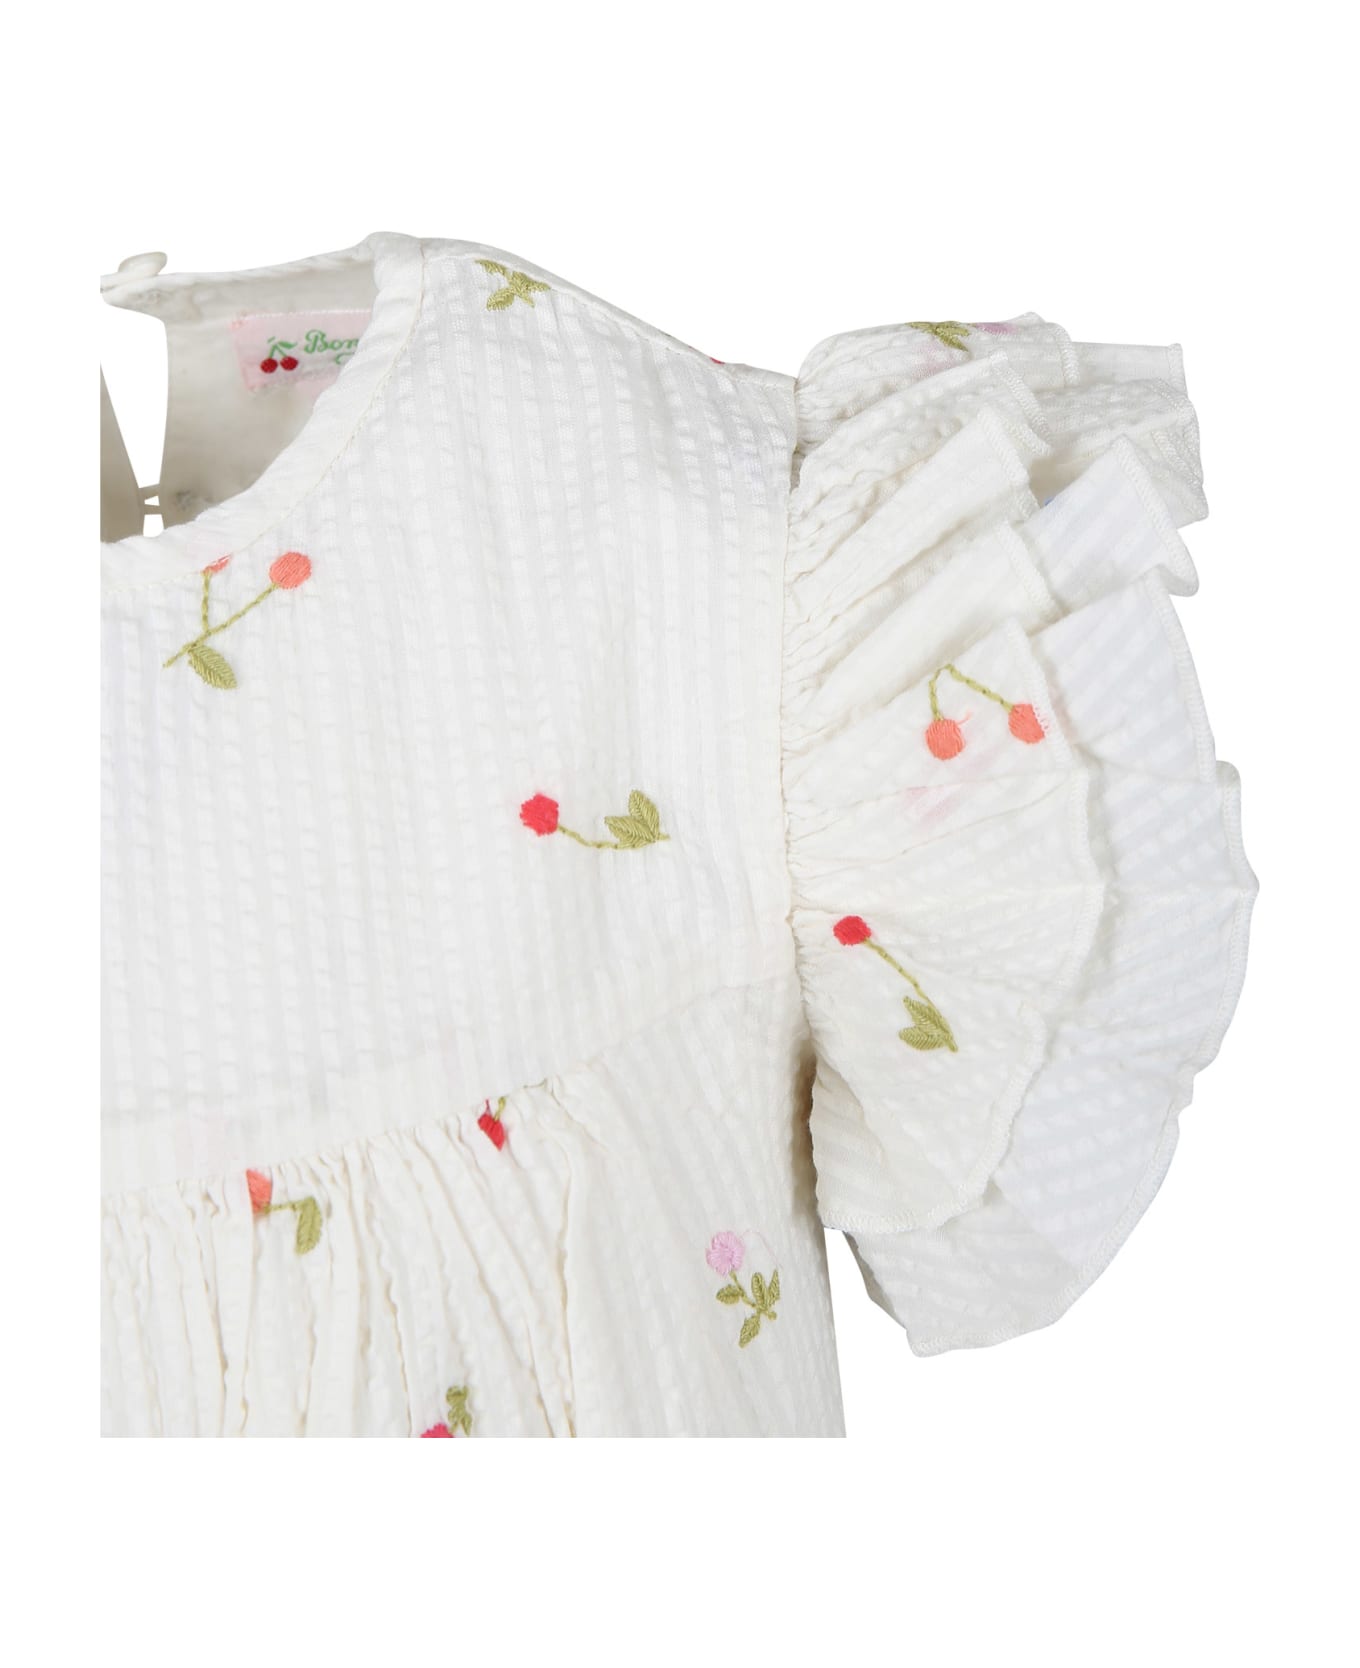 Bonpoint White Dress For Girl With All-over Cherry And Multicolor Flower Embroidery - White